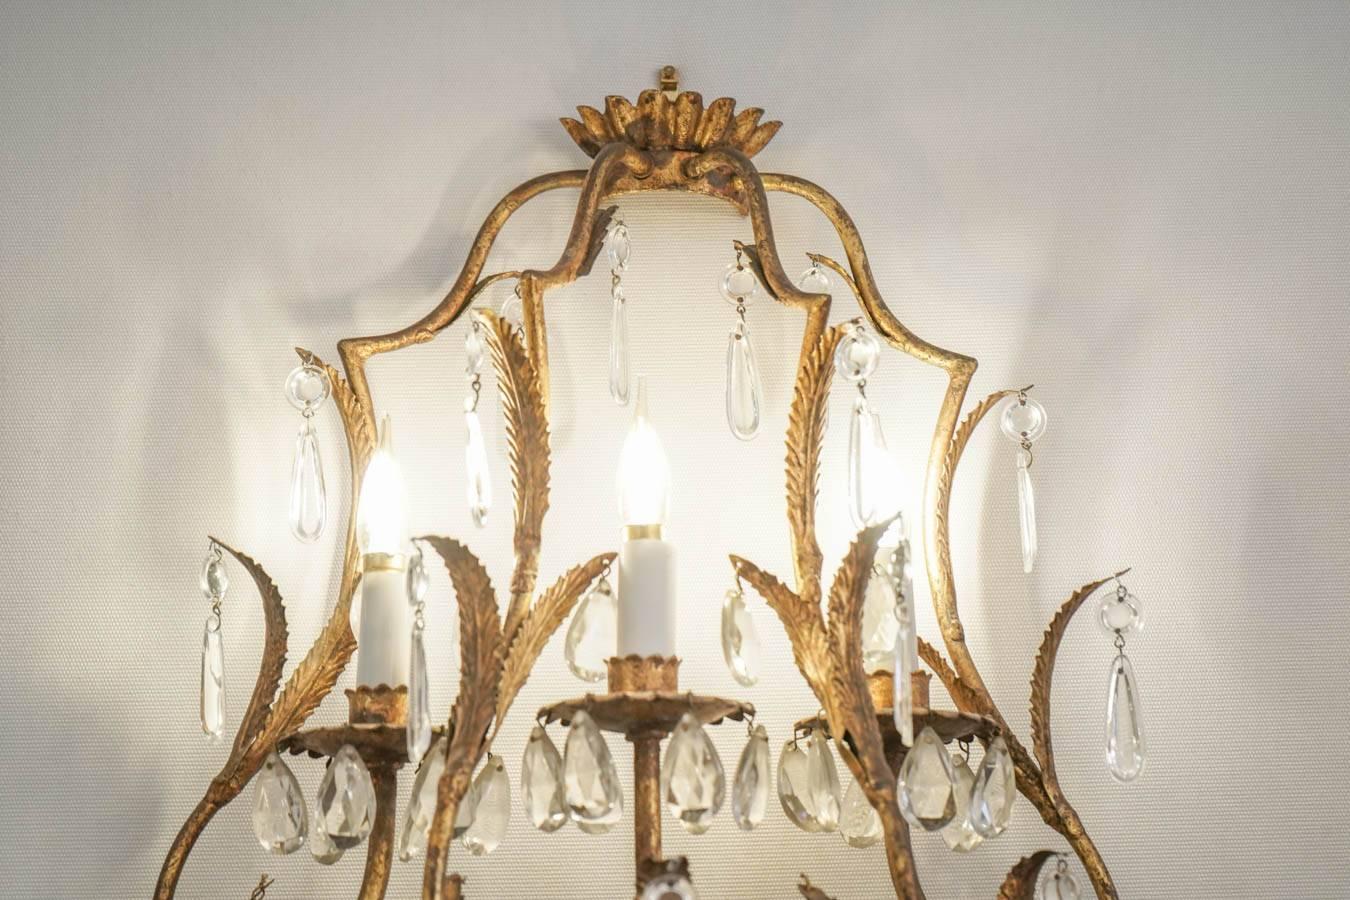 Gilt Pair of Sconces in Gold gilt metal with crystals, 1950-1960, Three lights